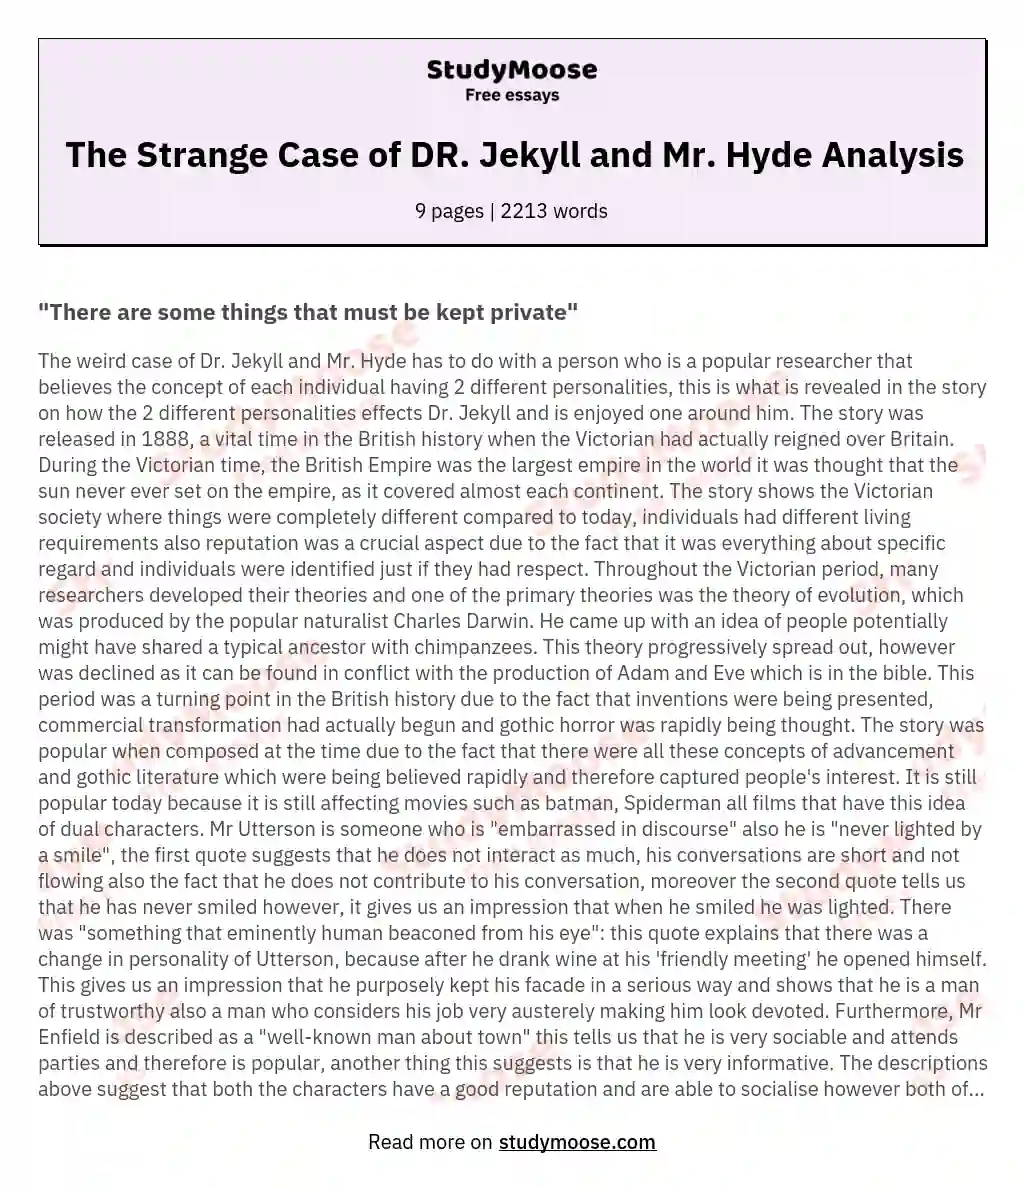 The Strange Case of DR. Jekyll and Mr. Hyde Analysis essay